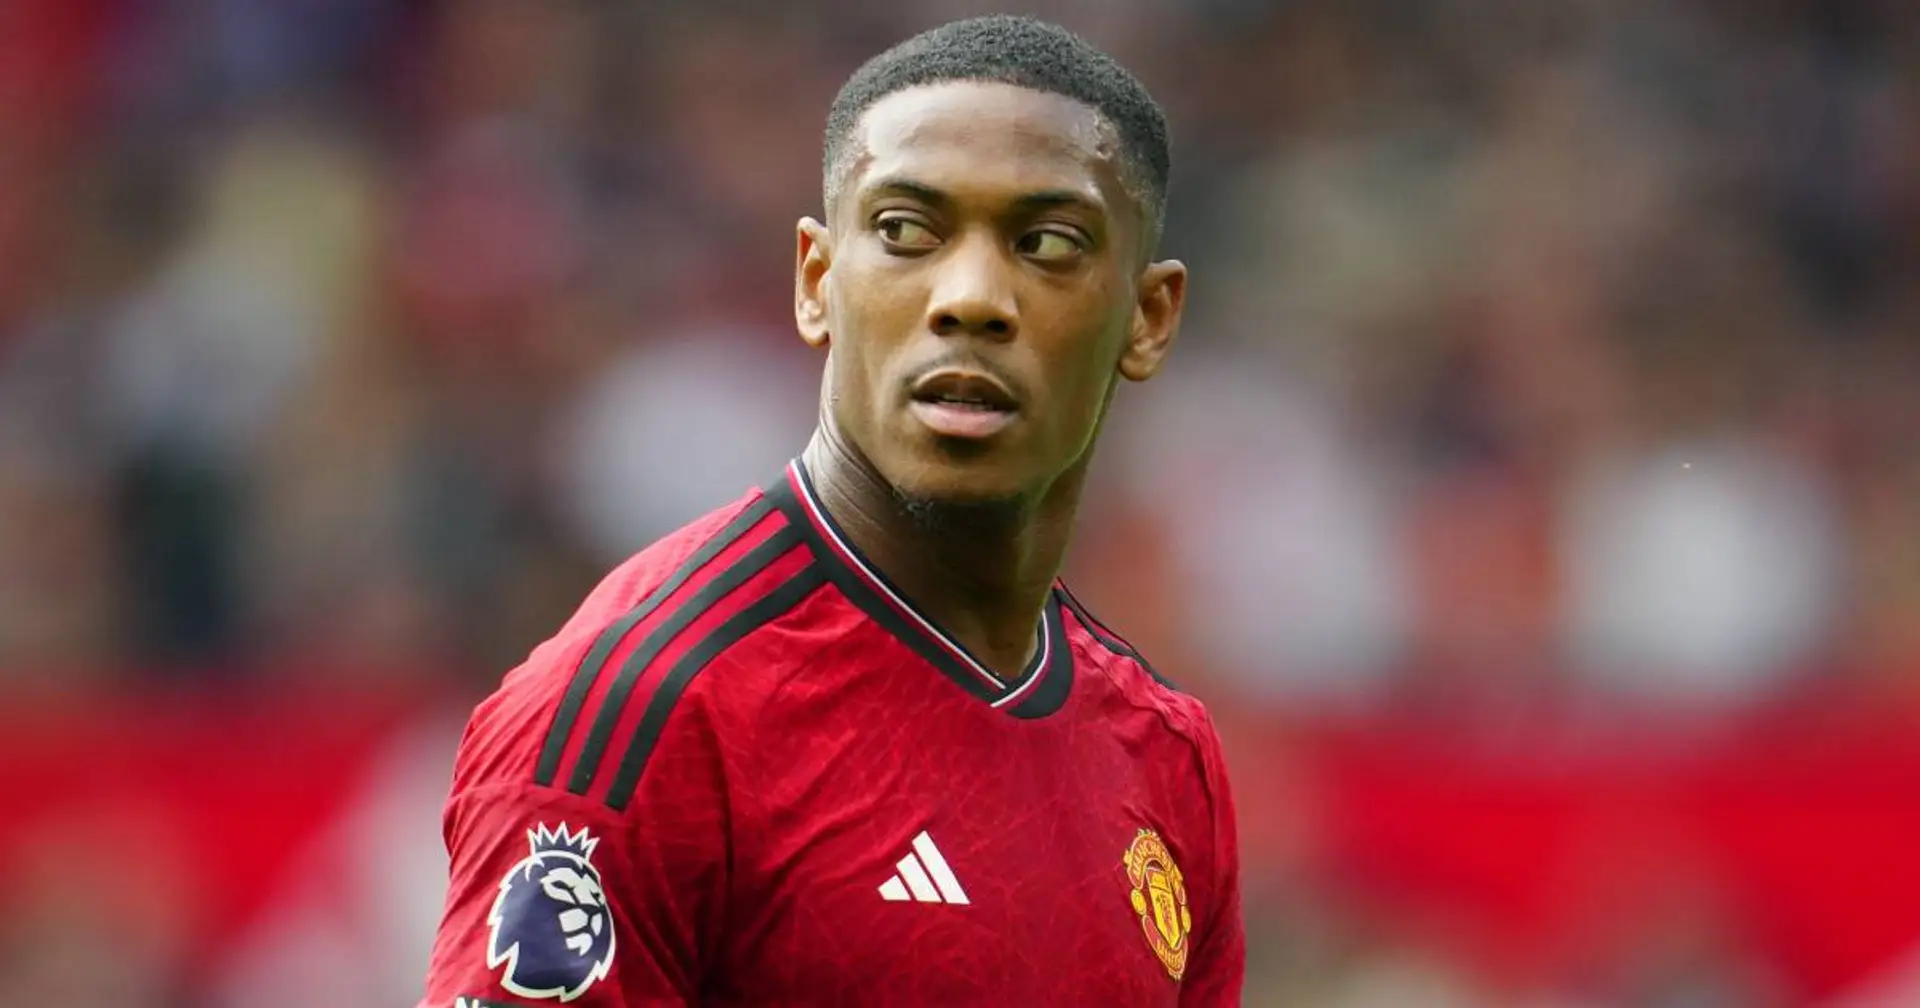 Anthony Martial 'offered' to Inter Milan, their stance on signing him revealed